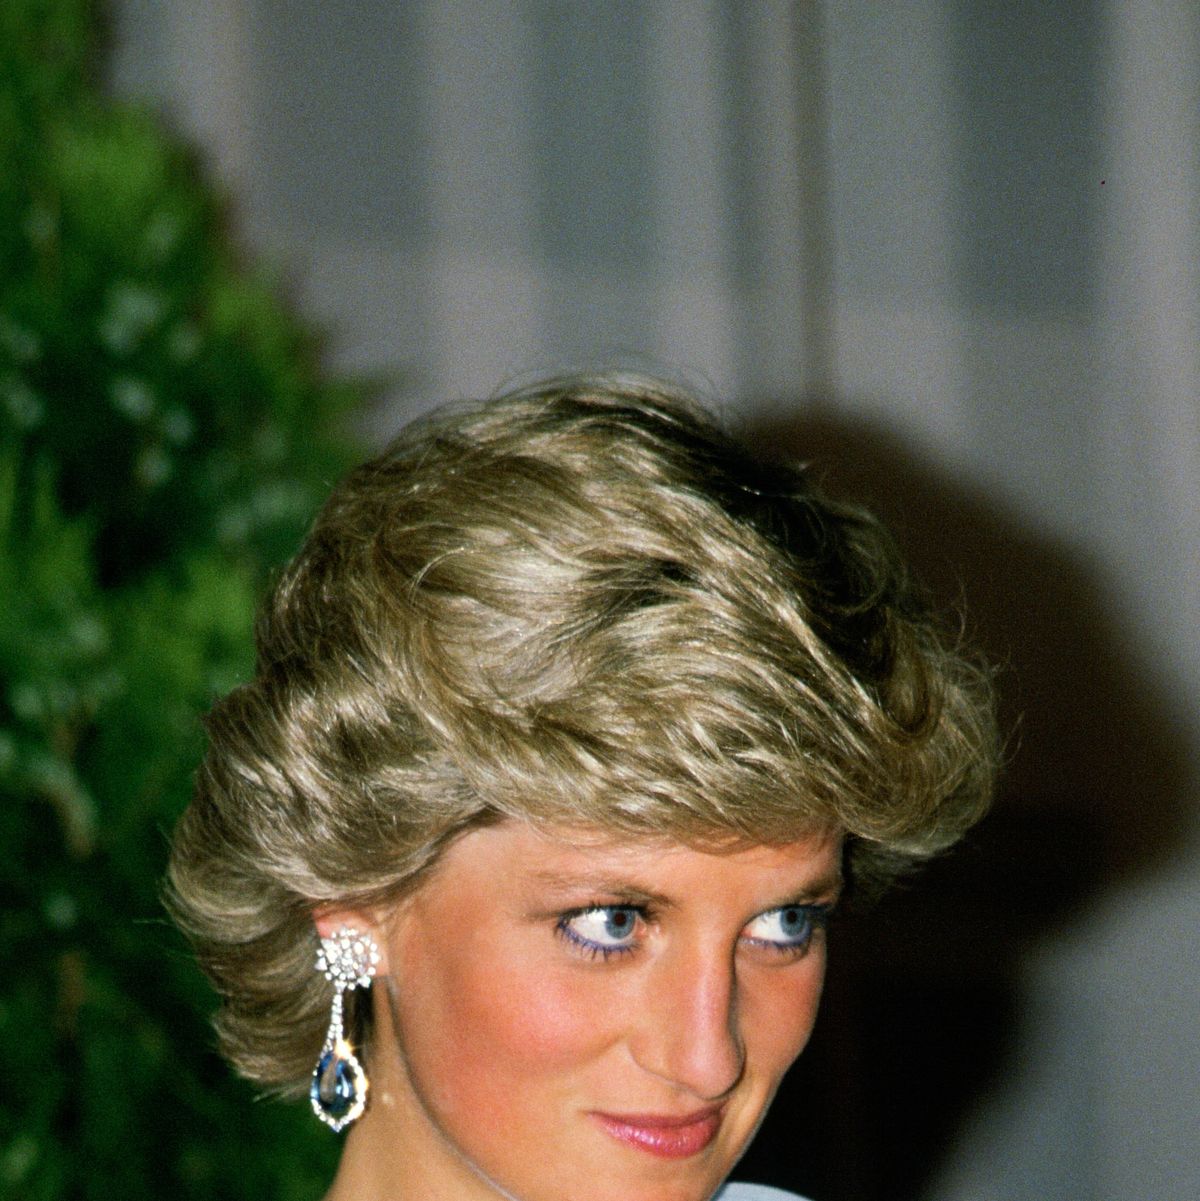 Princess Diana's Elizabeth Arden Cream Is Available at  For $27 –  StyleCaster